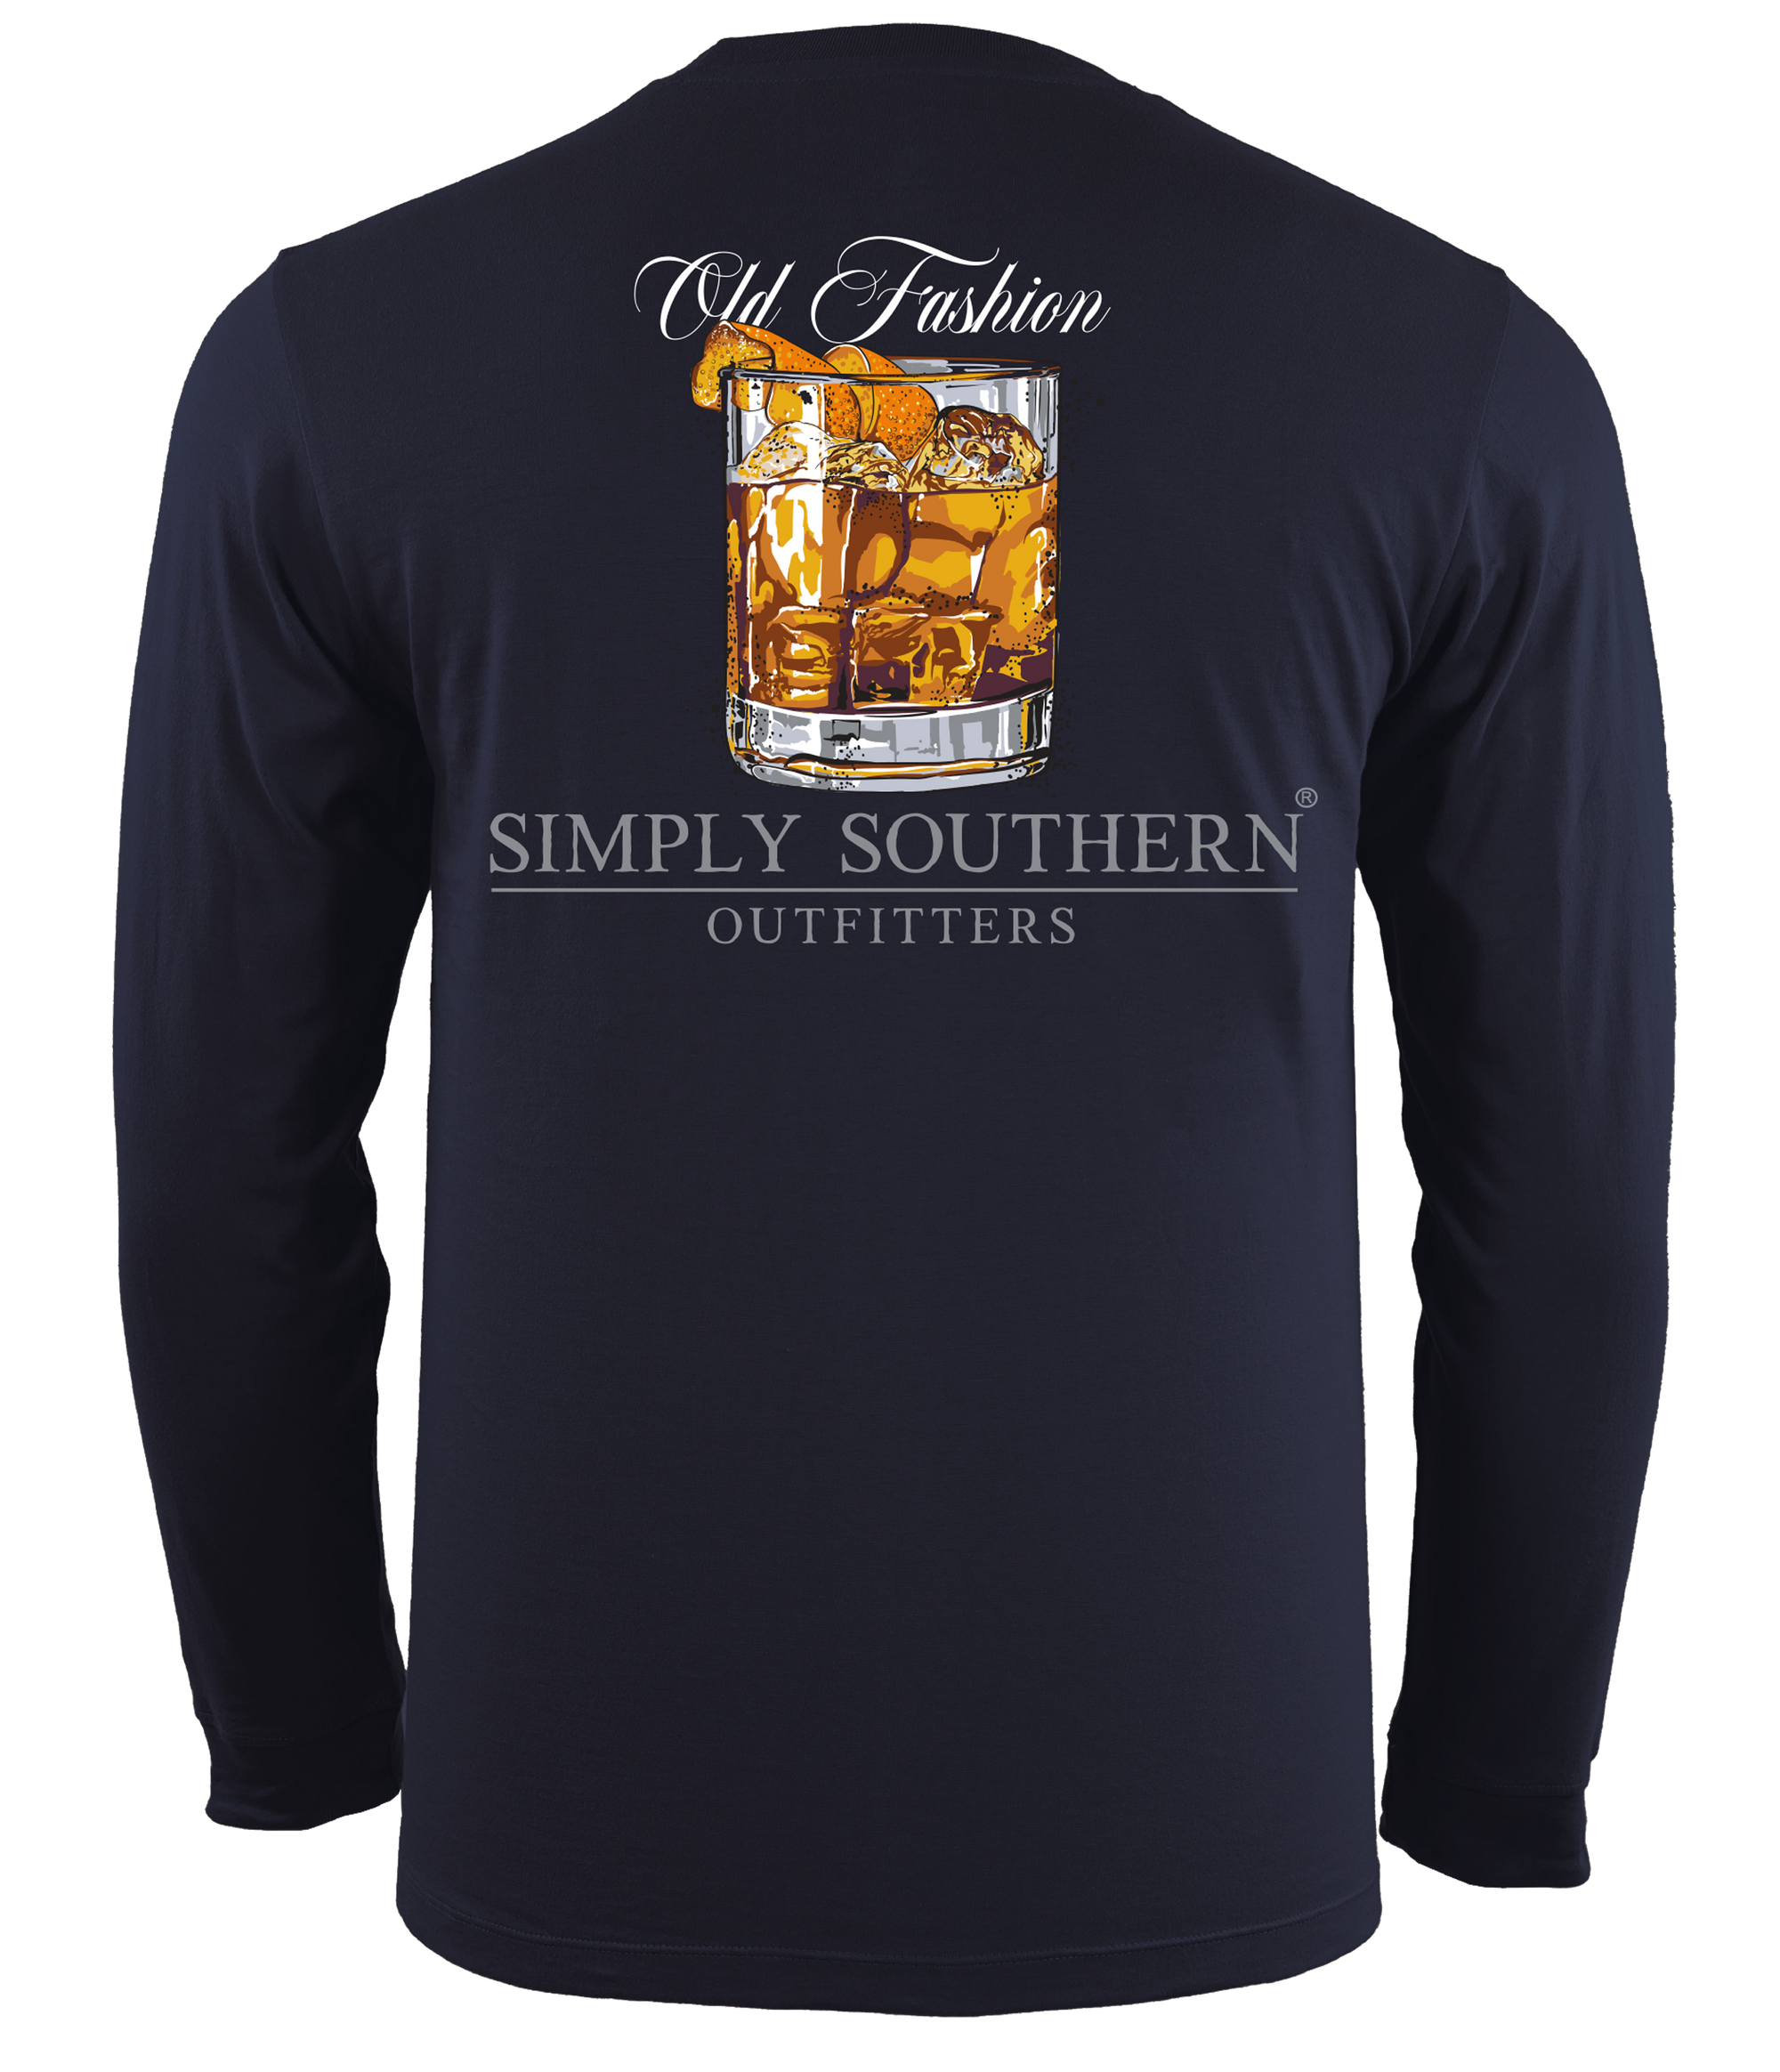 SALE Simply Southern Old Fashion Unisex Long Sleeve T-Shirt